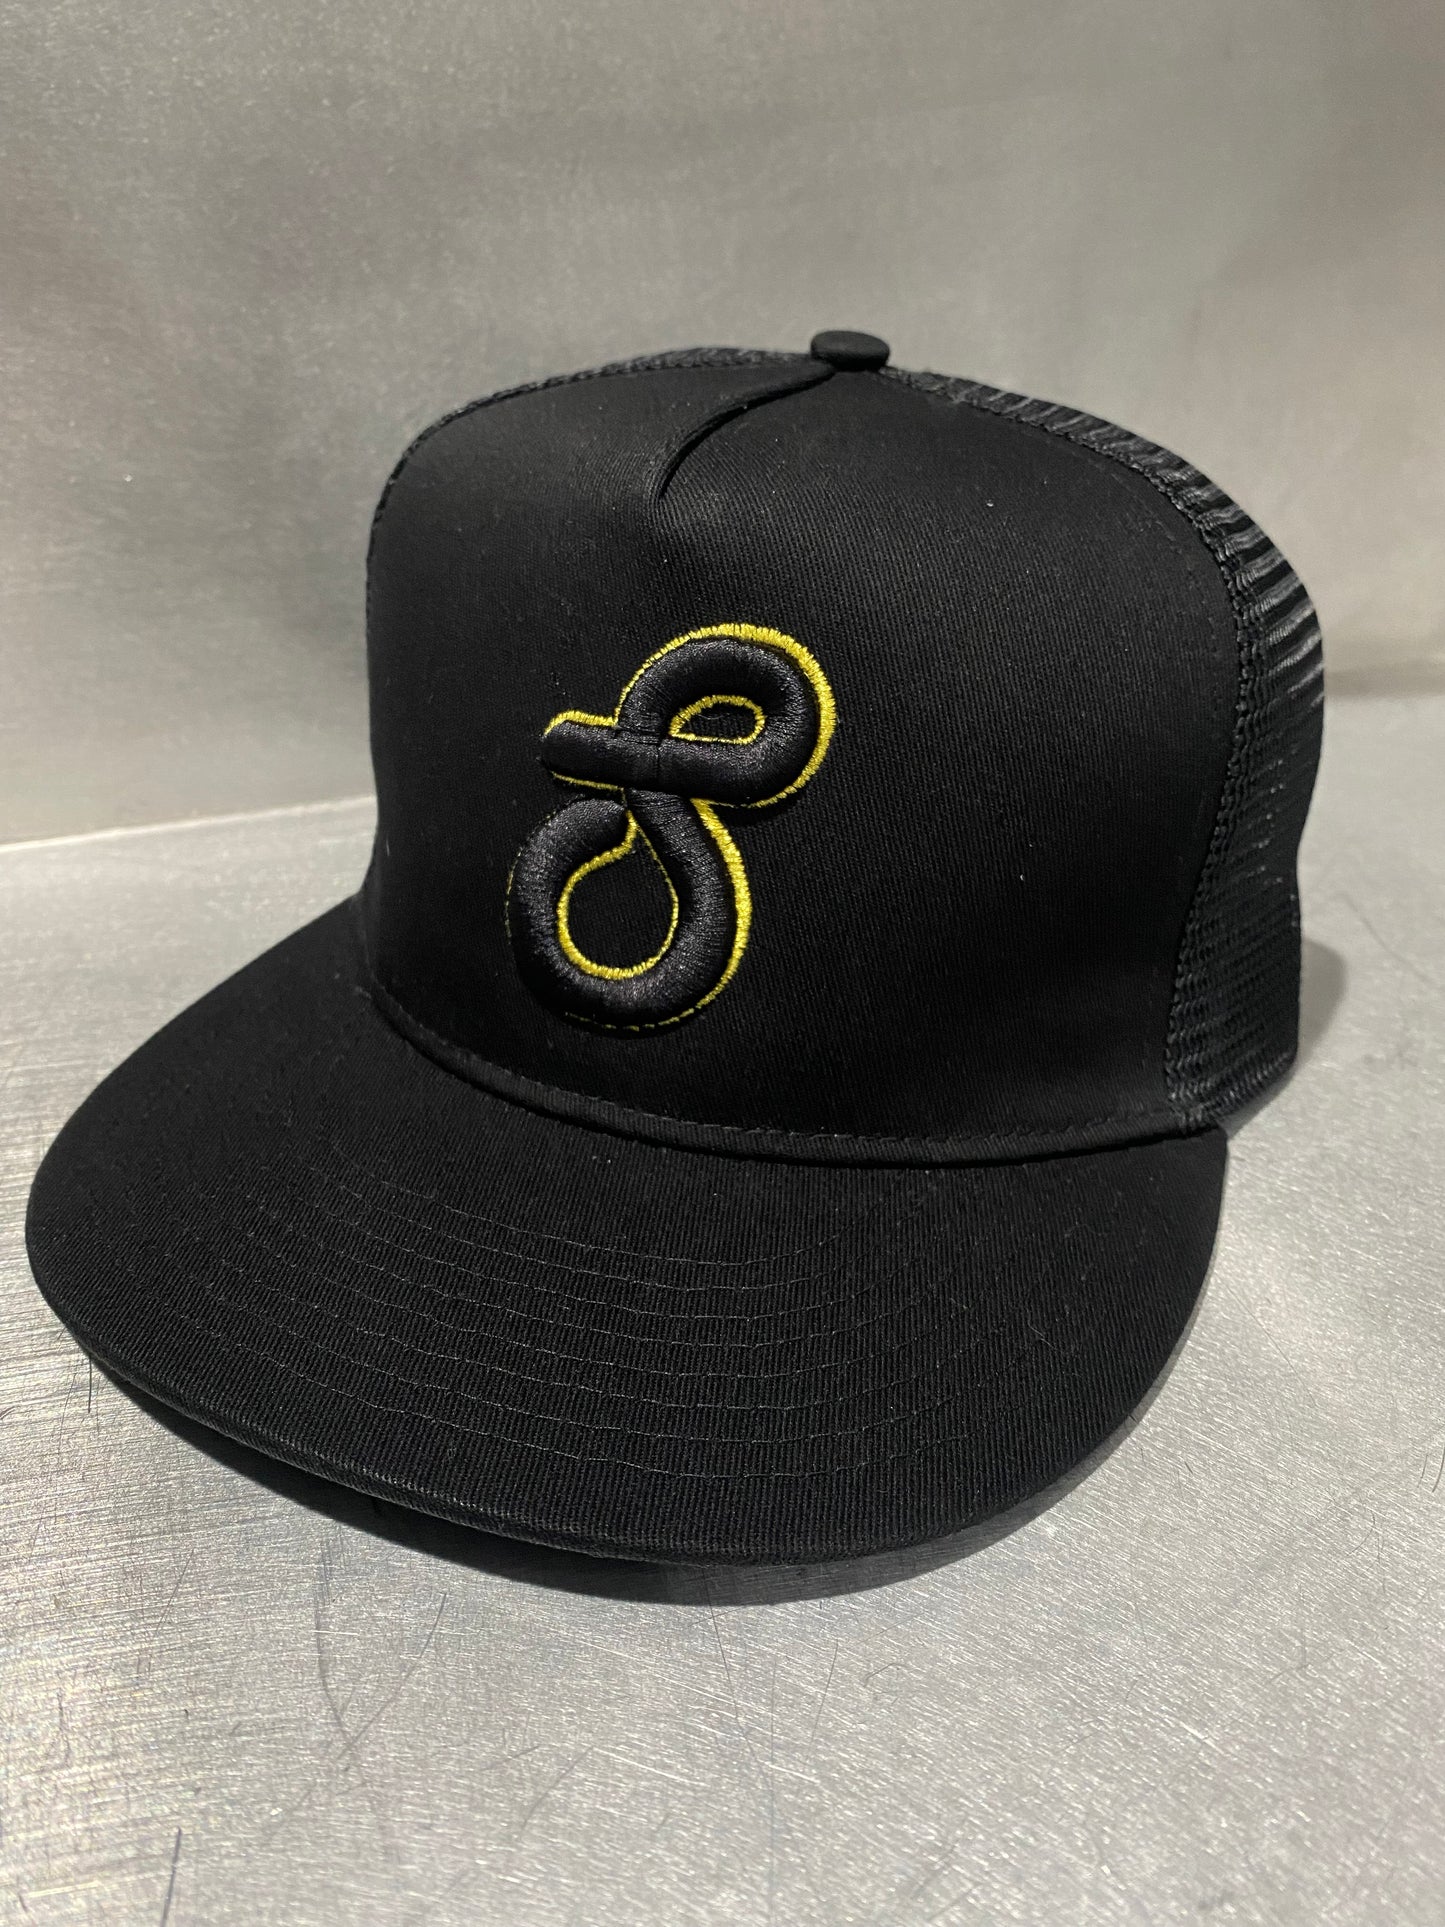 Stoner's Speed Shop Puff S Gold and black